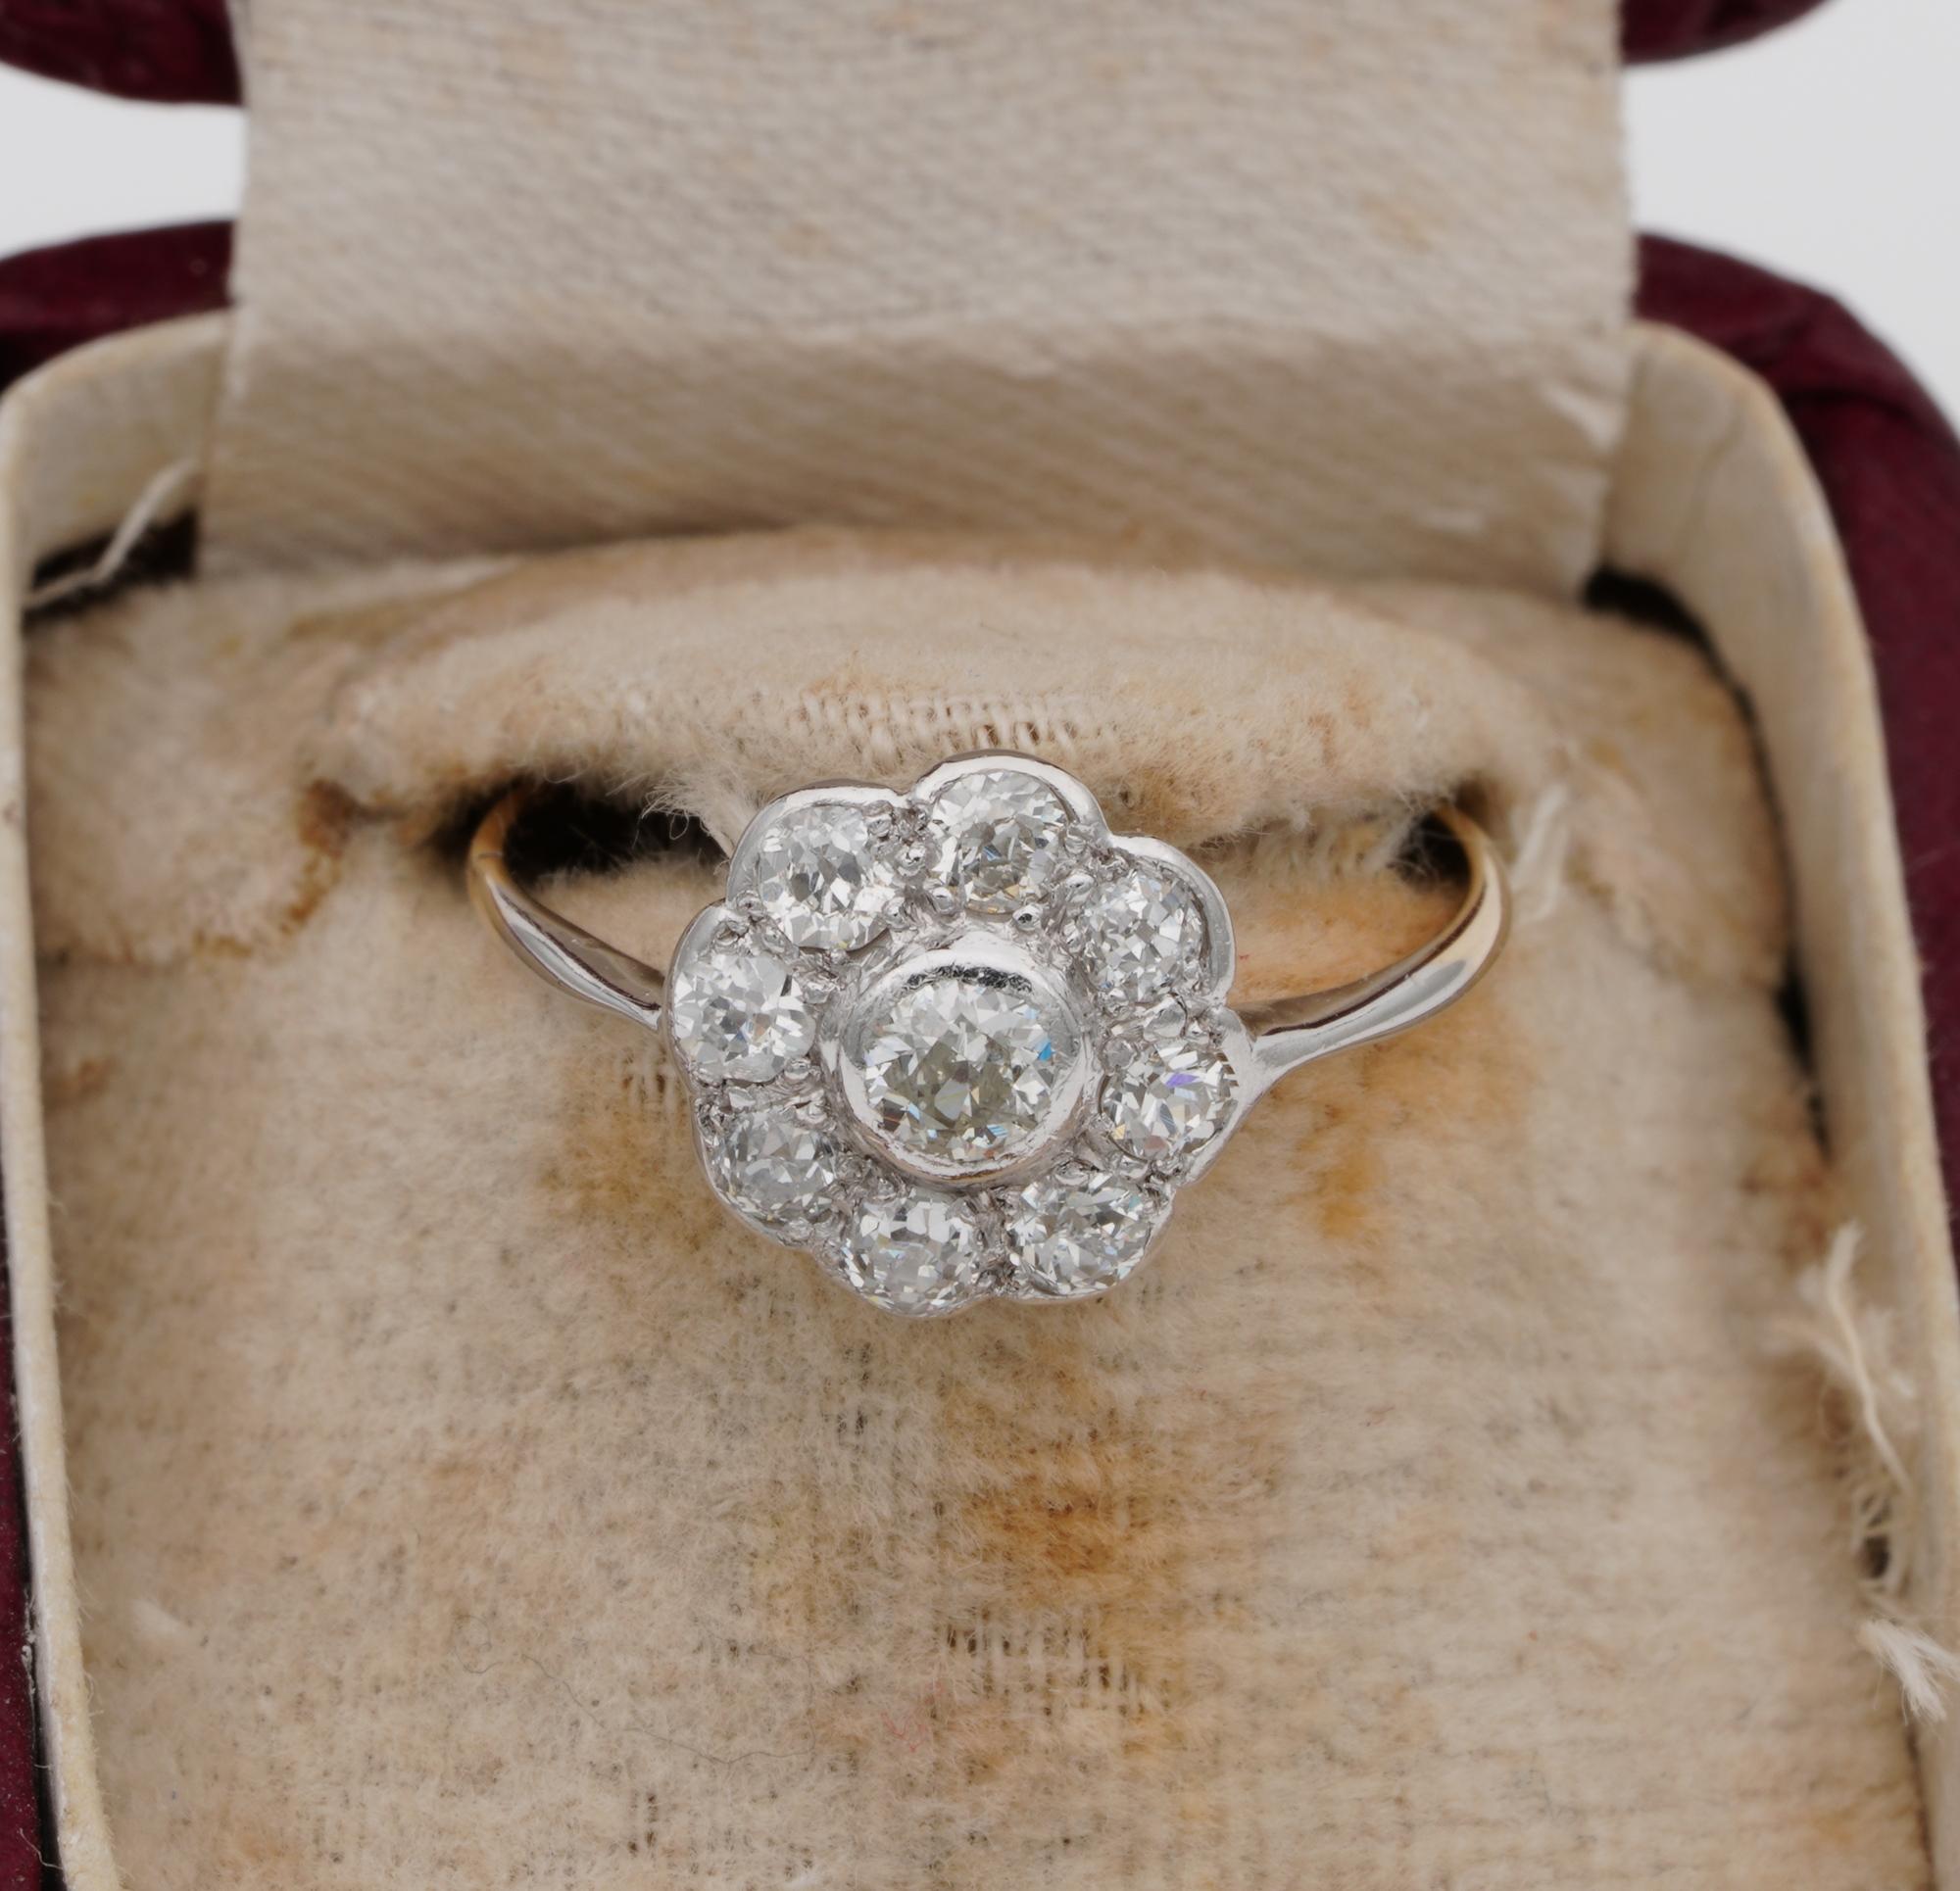 Engaged!

This enchanting authentic Edwardian Diamond cluster ring steps into back history
Gorgeous Daisy designed, refined in workmanship as individually hand crafted at the time – made of solid 18 KT gold and Platinum
Distinctive, romantic, Flower